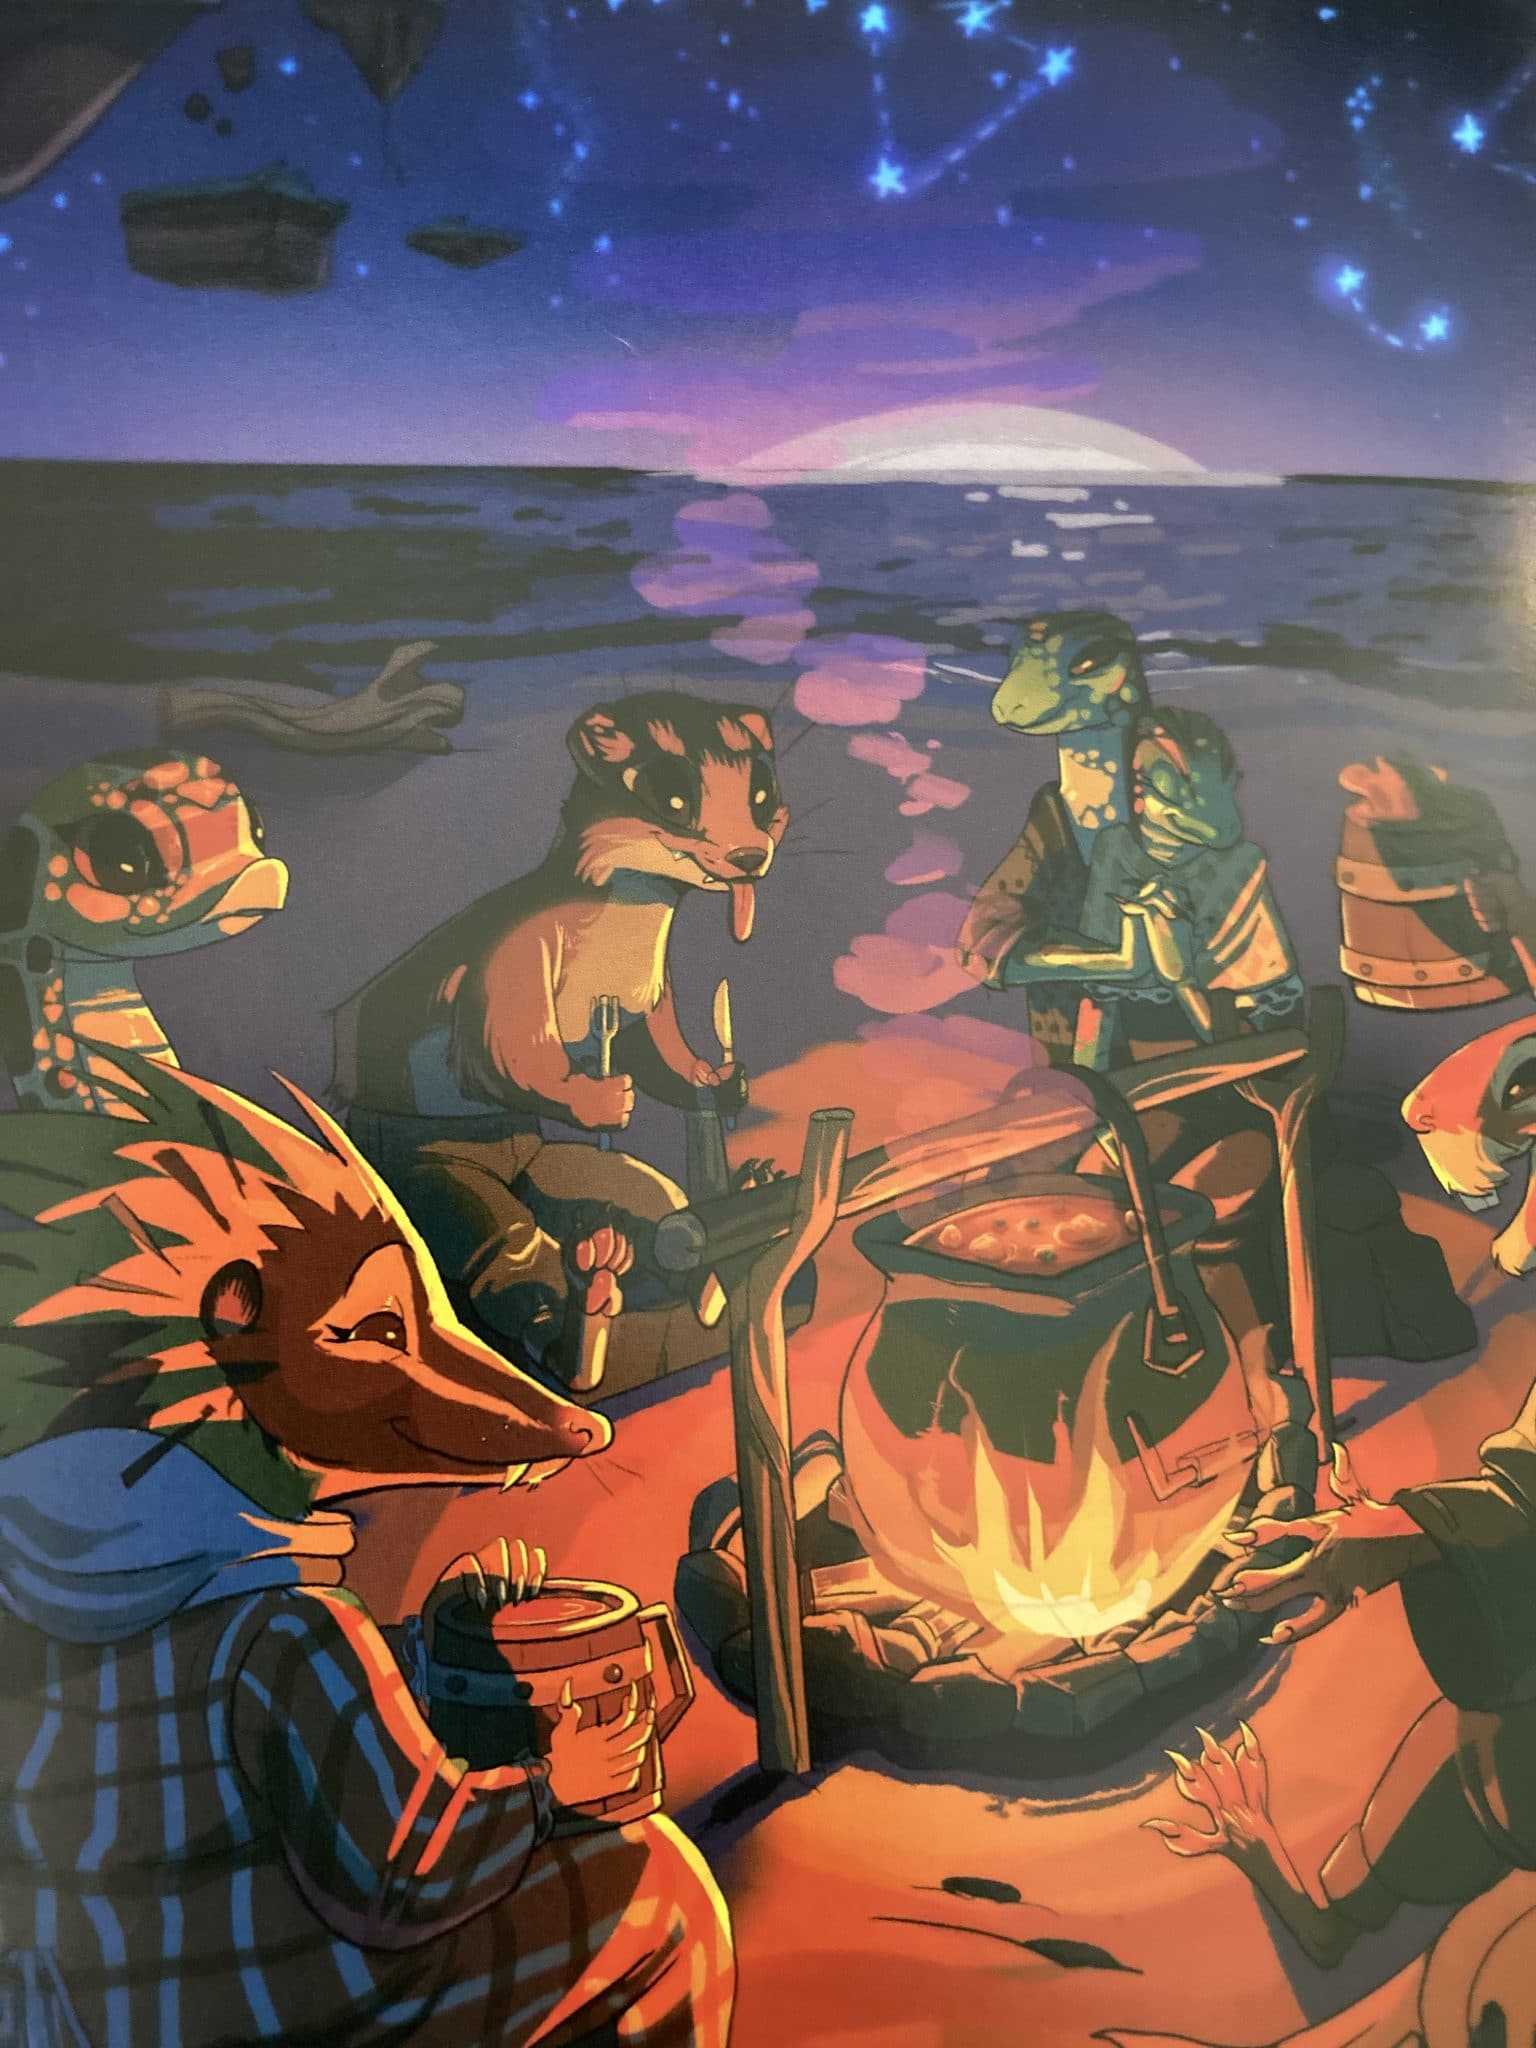 A hedgehog, rabbit, lizard, snake, and otter laugh around a campfire where a giant cauldron of stew bubbles under the starry sky.